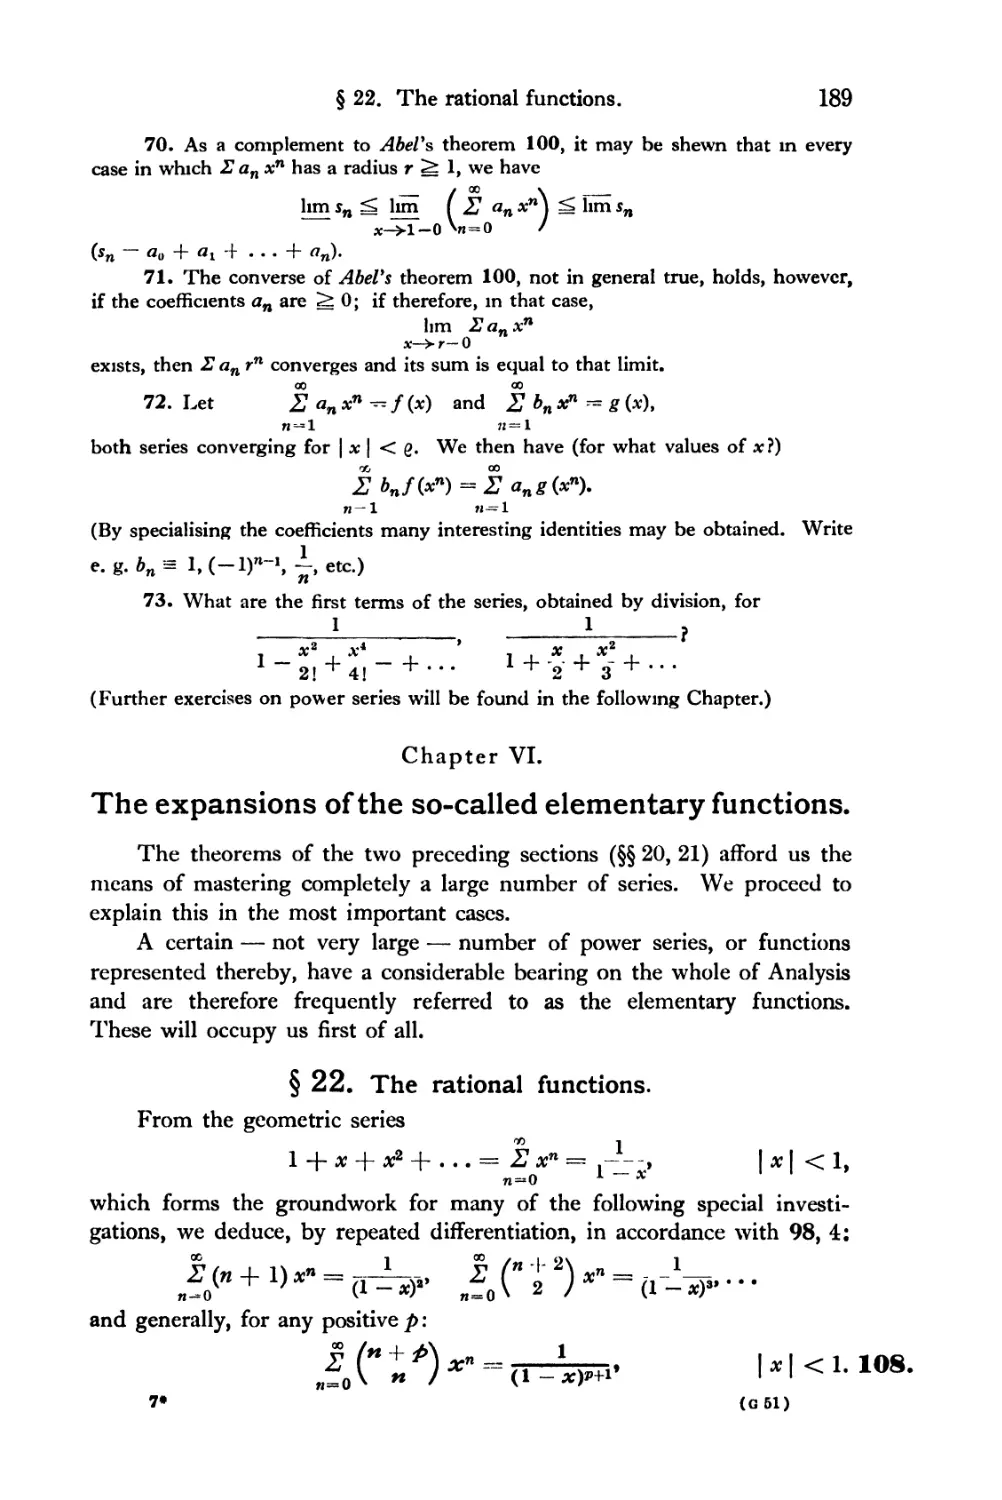 Chapter VI. The expansions of the so-called elementary functions